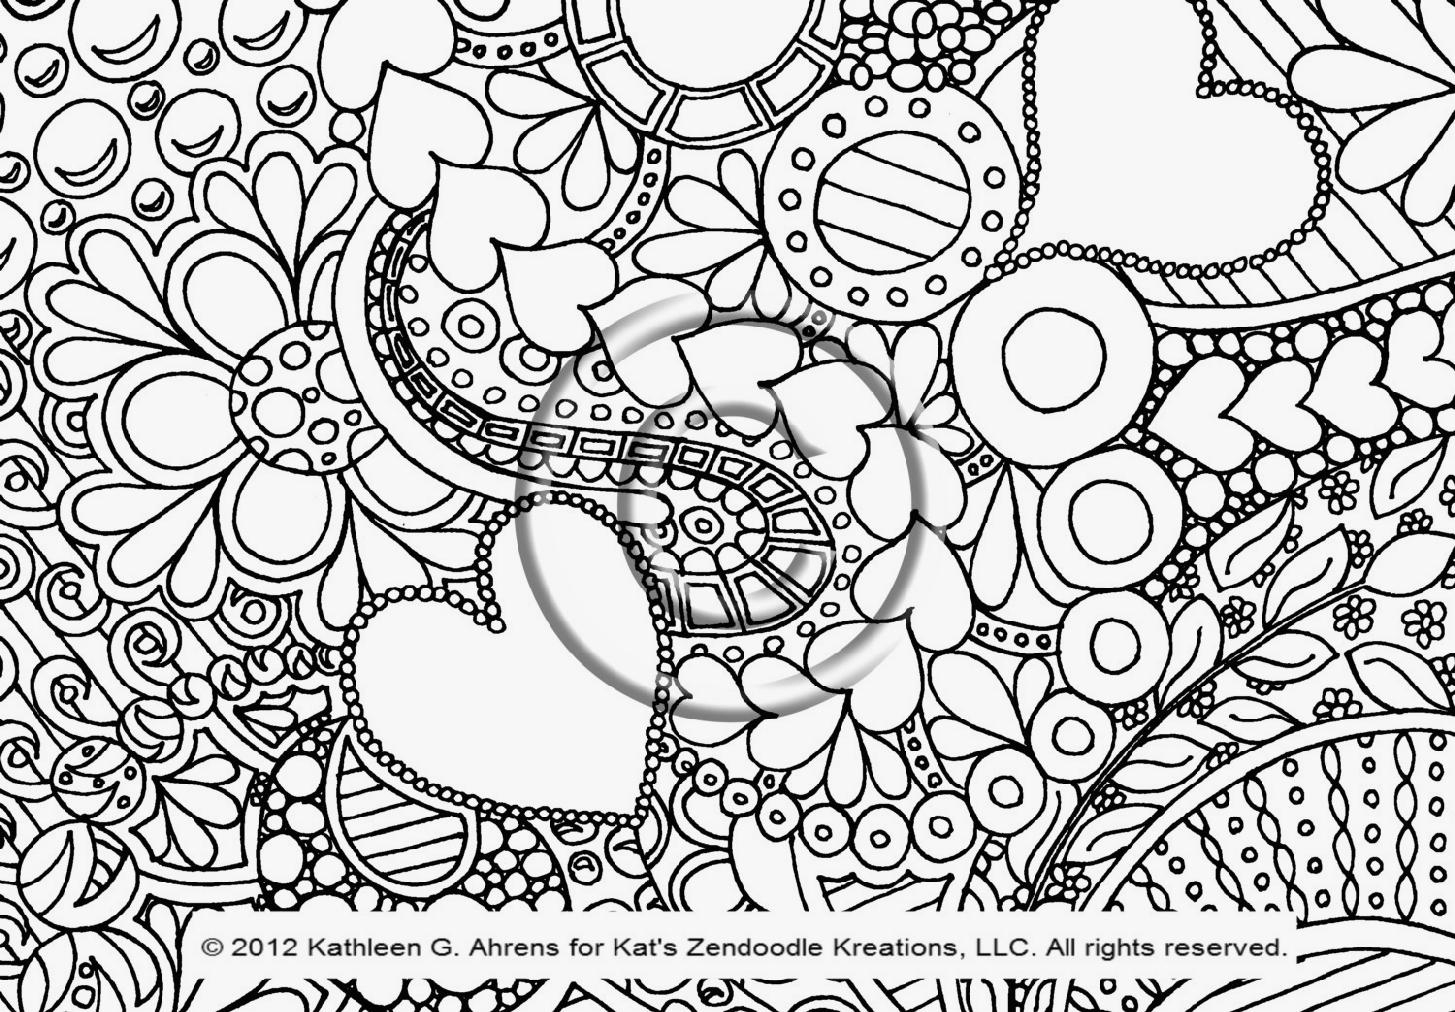 Coloring Pages : Doodle Art Coloring Pages Csad Me Free Maryeit - Free Printable Doodle Art Coloring Pages